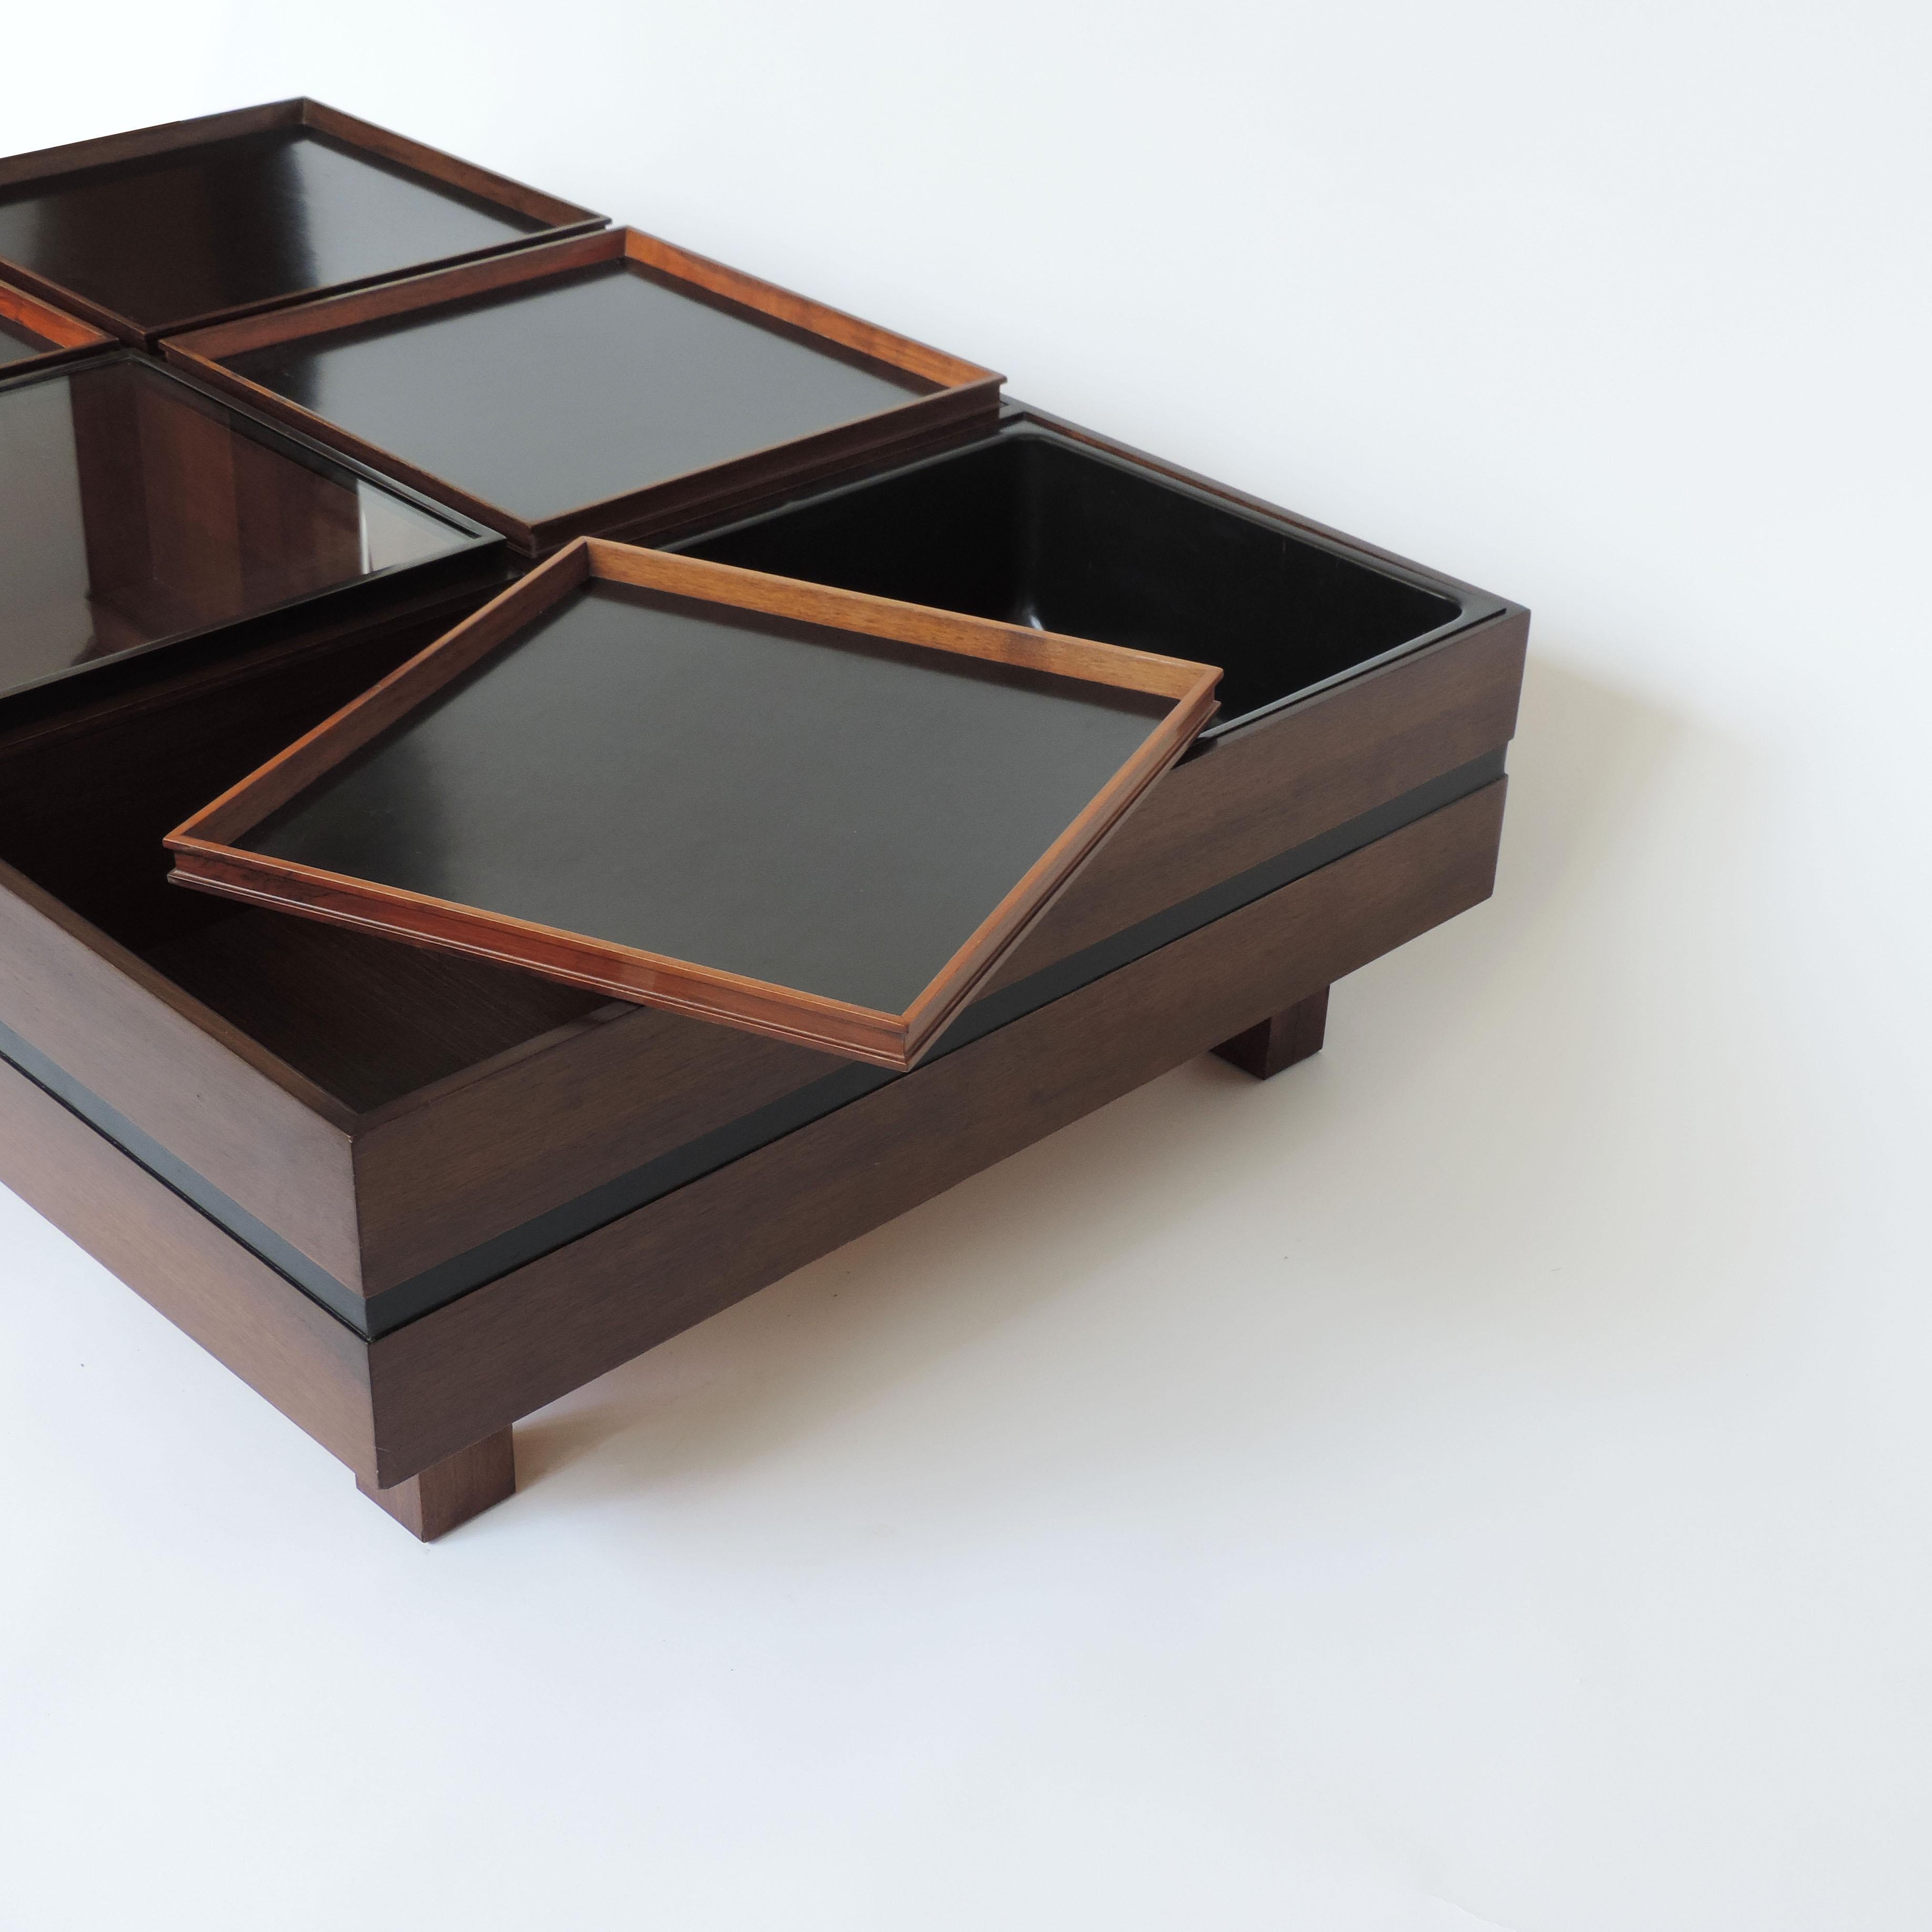 Carlo Hauner large coffee table with various compartments for Forma, Italy 1960s.
Four compartments covered with trays, one with glass which becomes a vitrine and one with a plastic container made for plants.